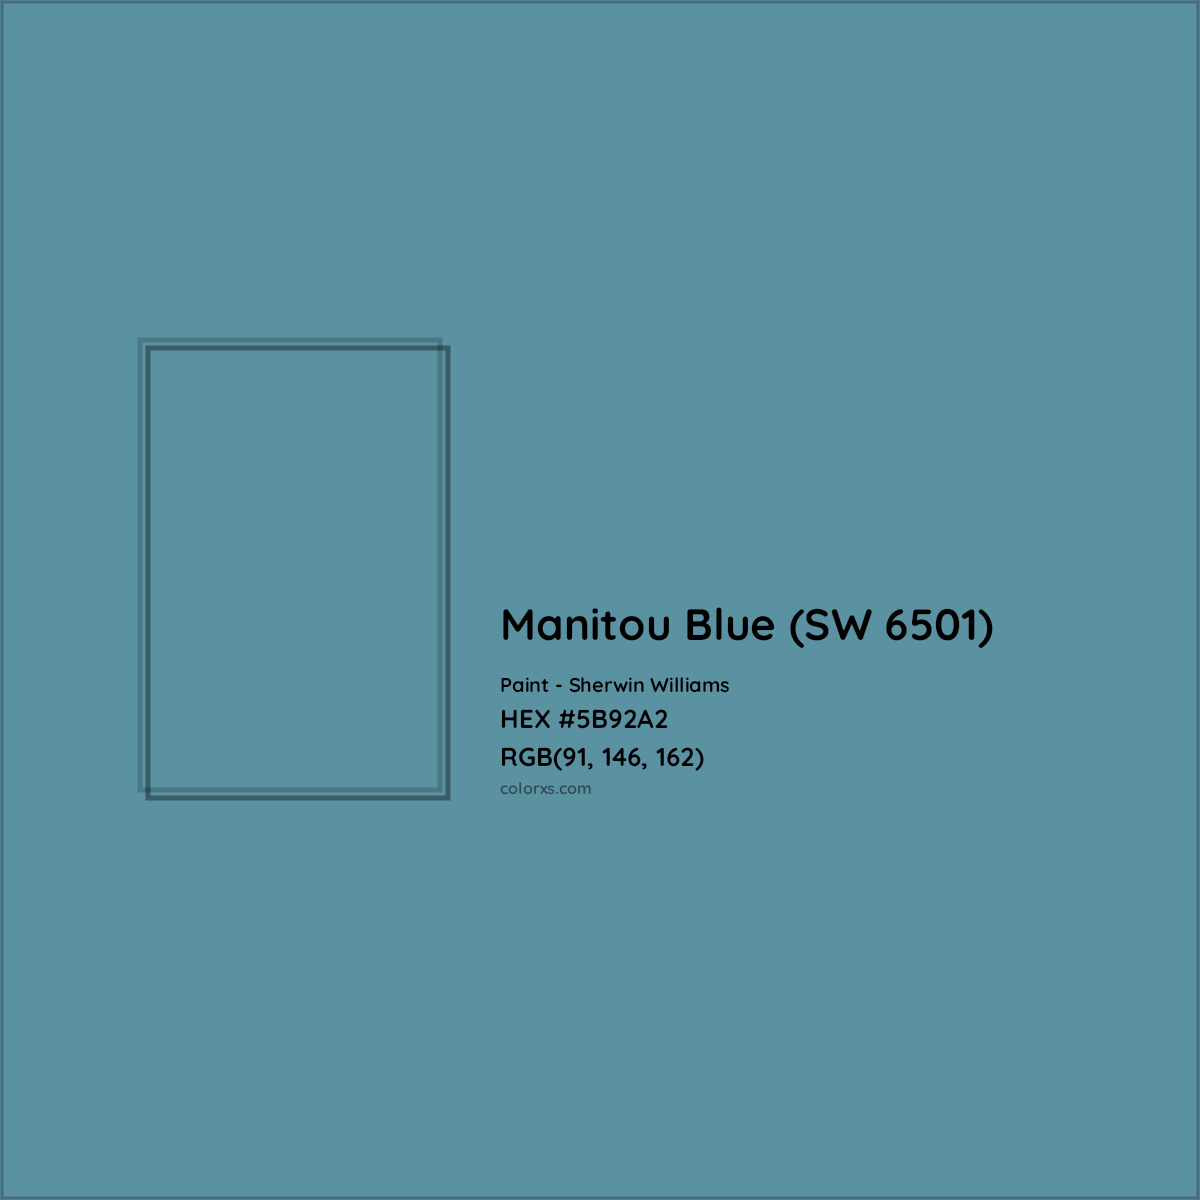 HEX #5B92A2 Manitou Blue (SW 6501) Paint Sherwin Williams - Color Code